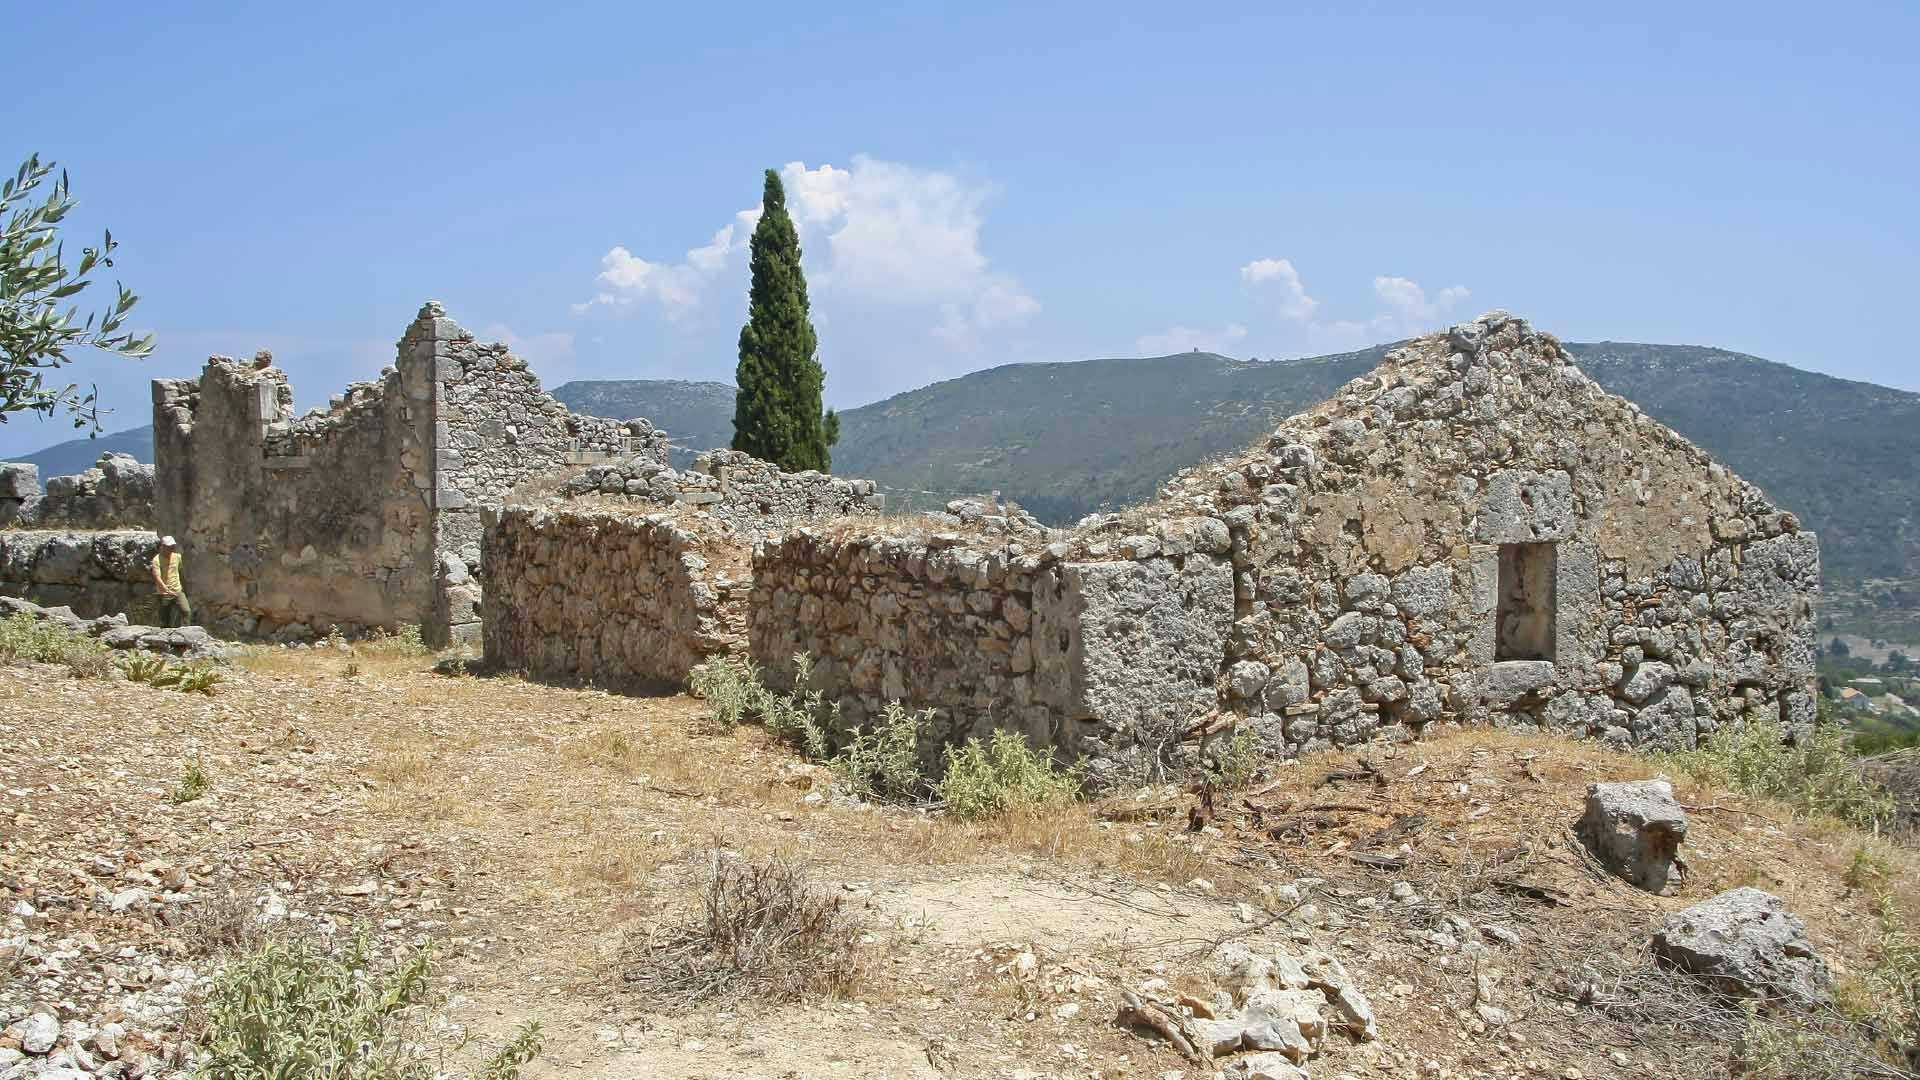 The ancient ruins at The School of Homer